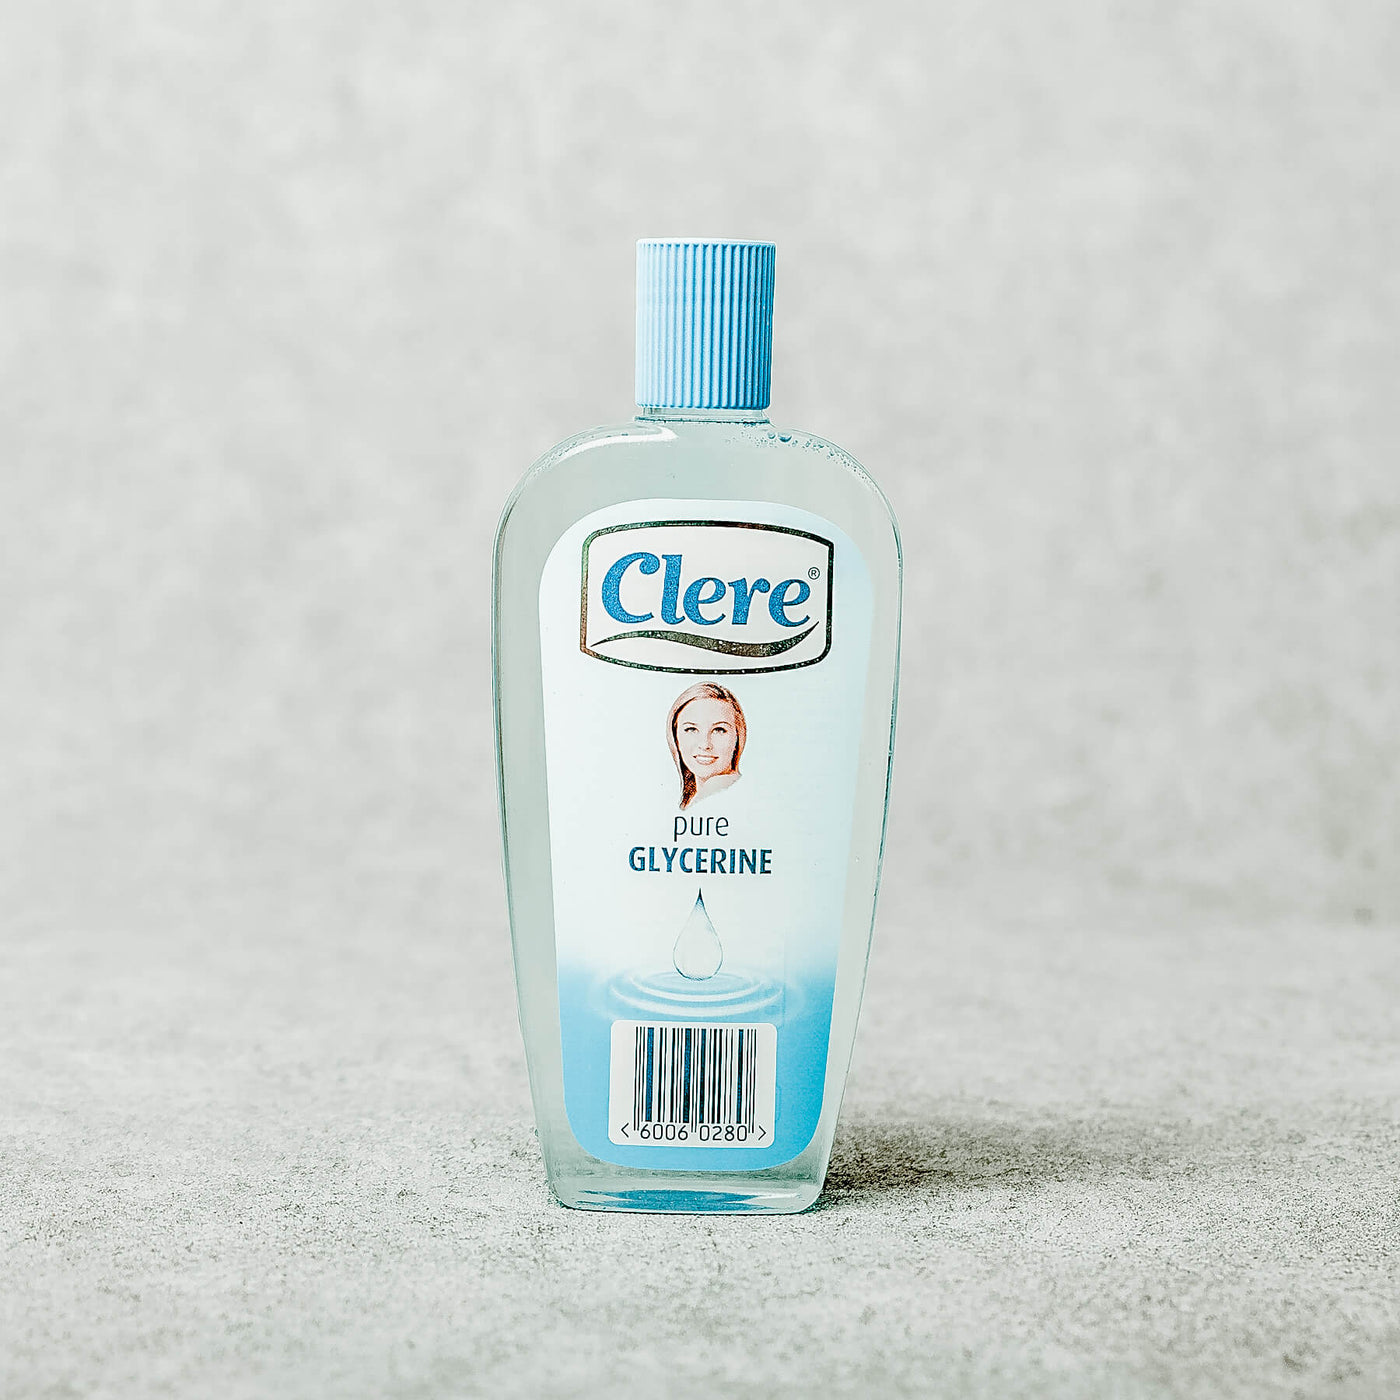 Clere - Pure Glycerin